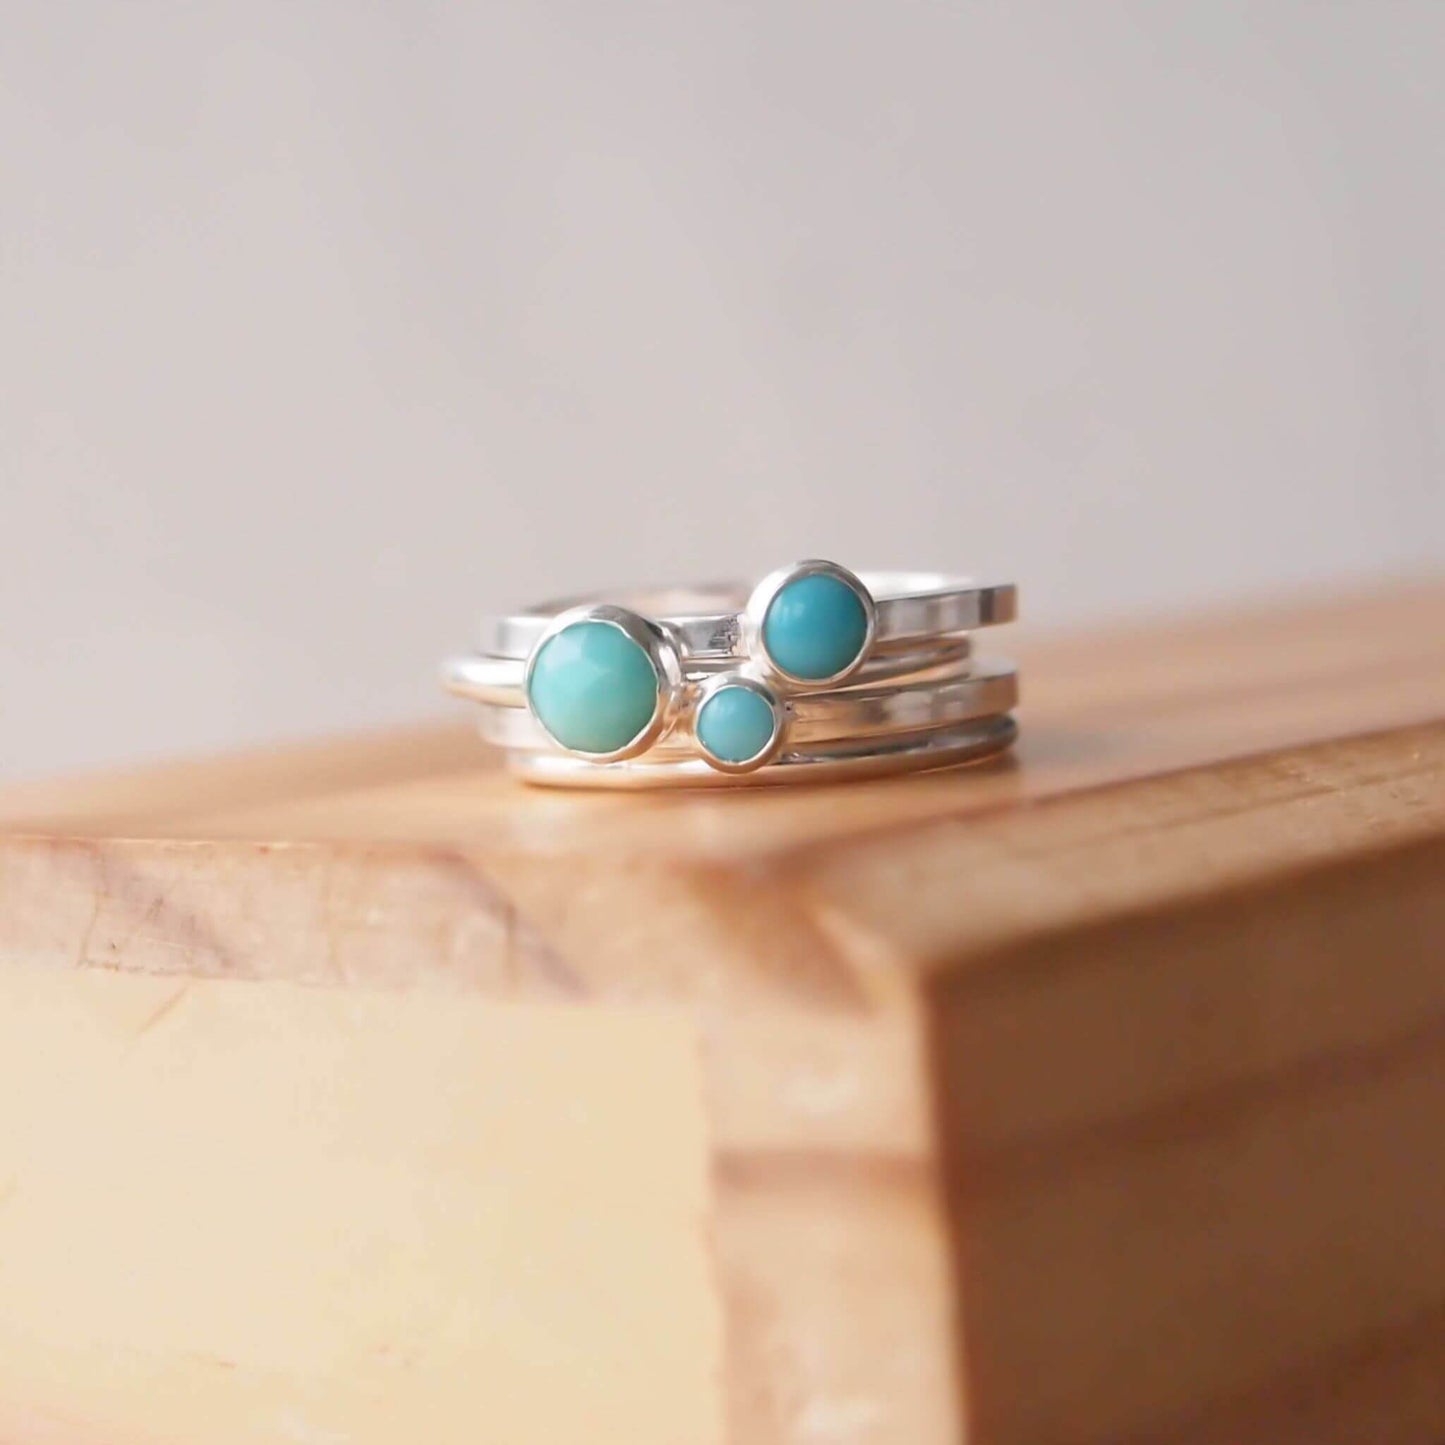 triple turquoise ring set with three gems in  sterling silver. Handmade in Scotland by maram jewellery